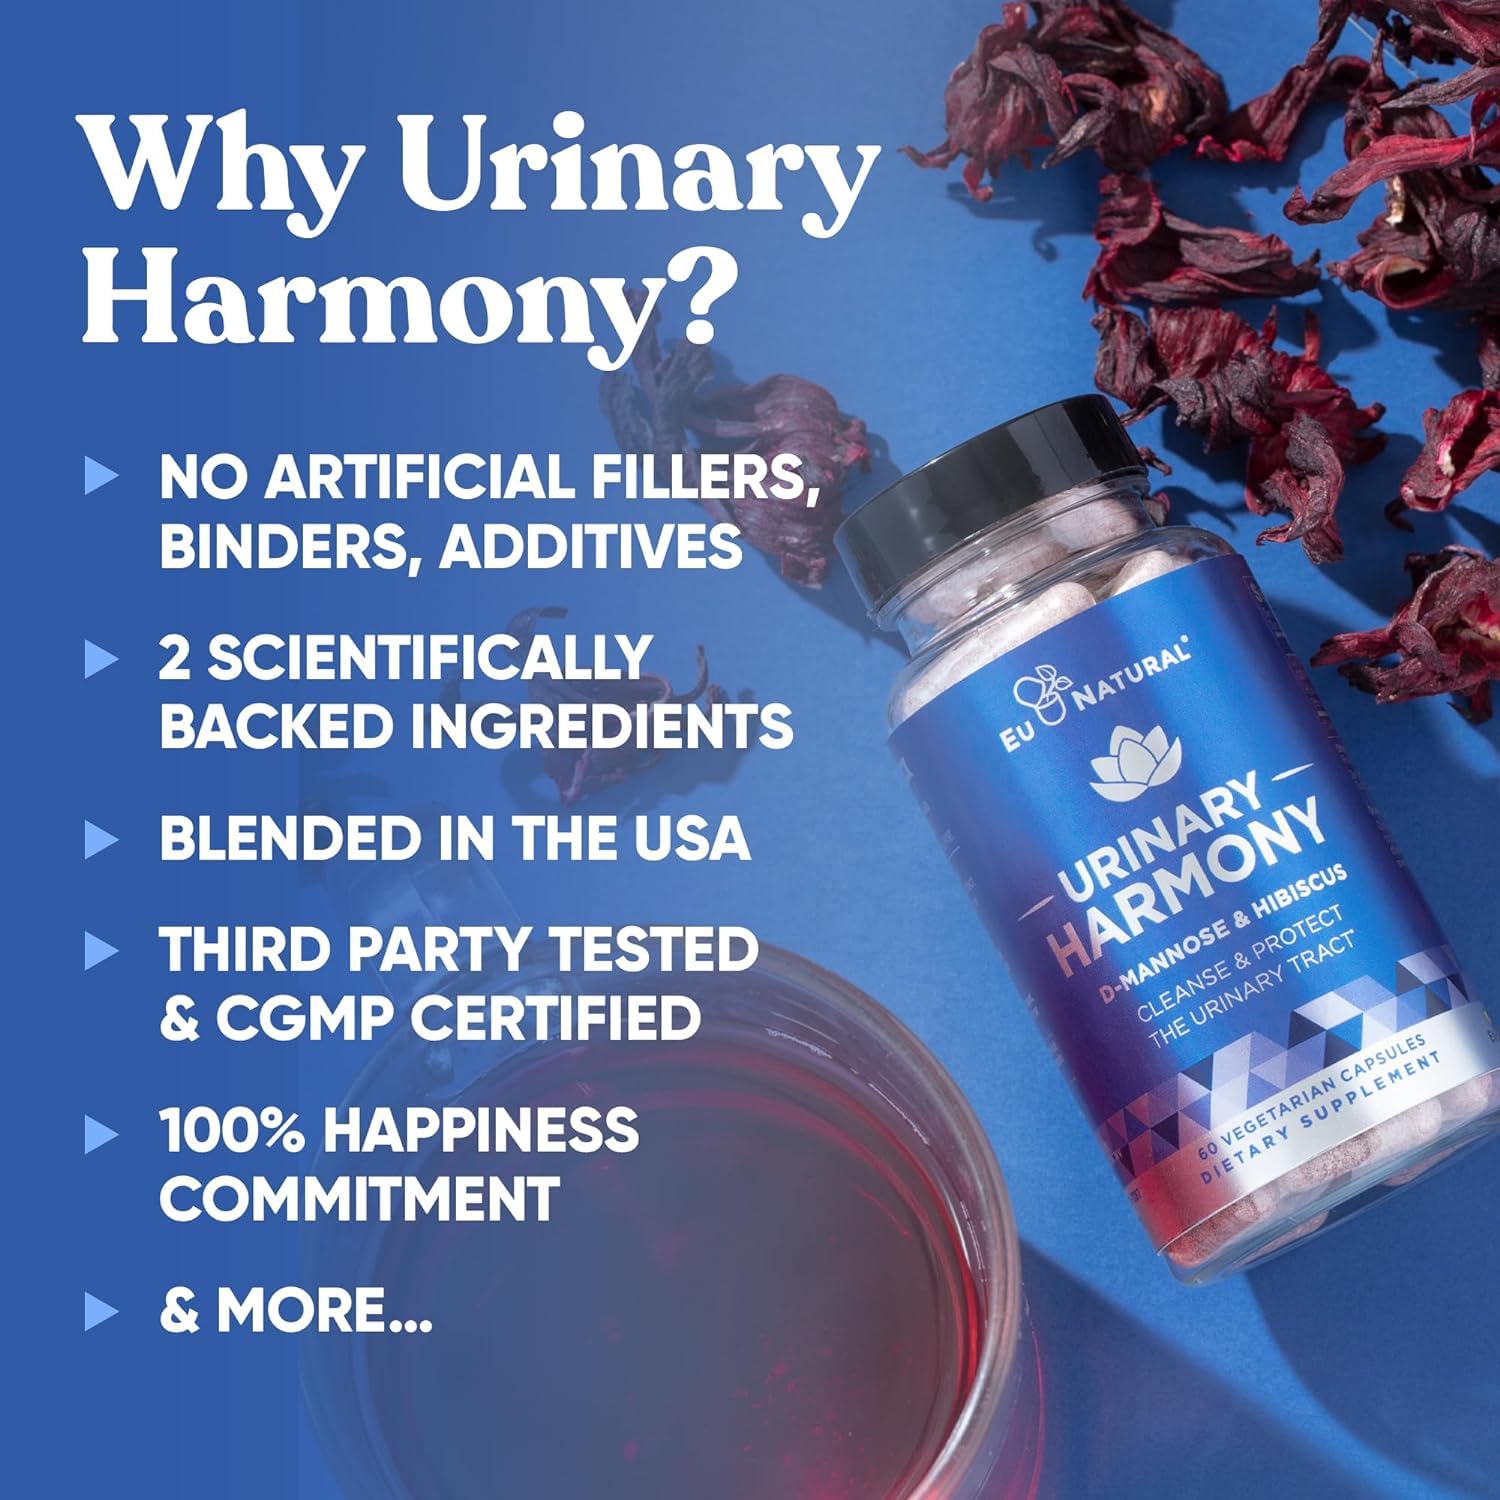 Urinary Harmony D-Mannose Supplement for Urinary Tract Health (60 Fast-Acting Capsules)